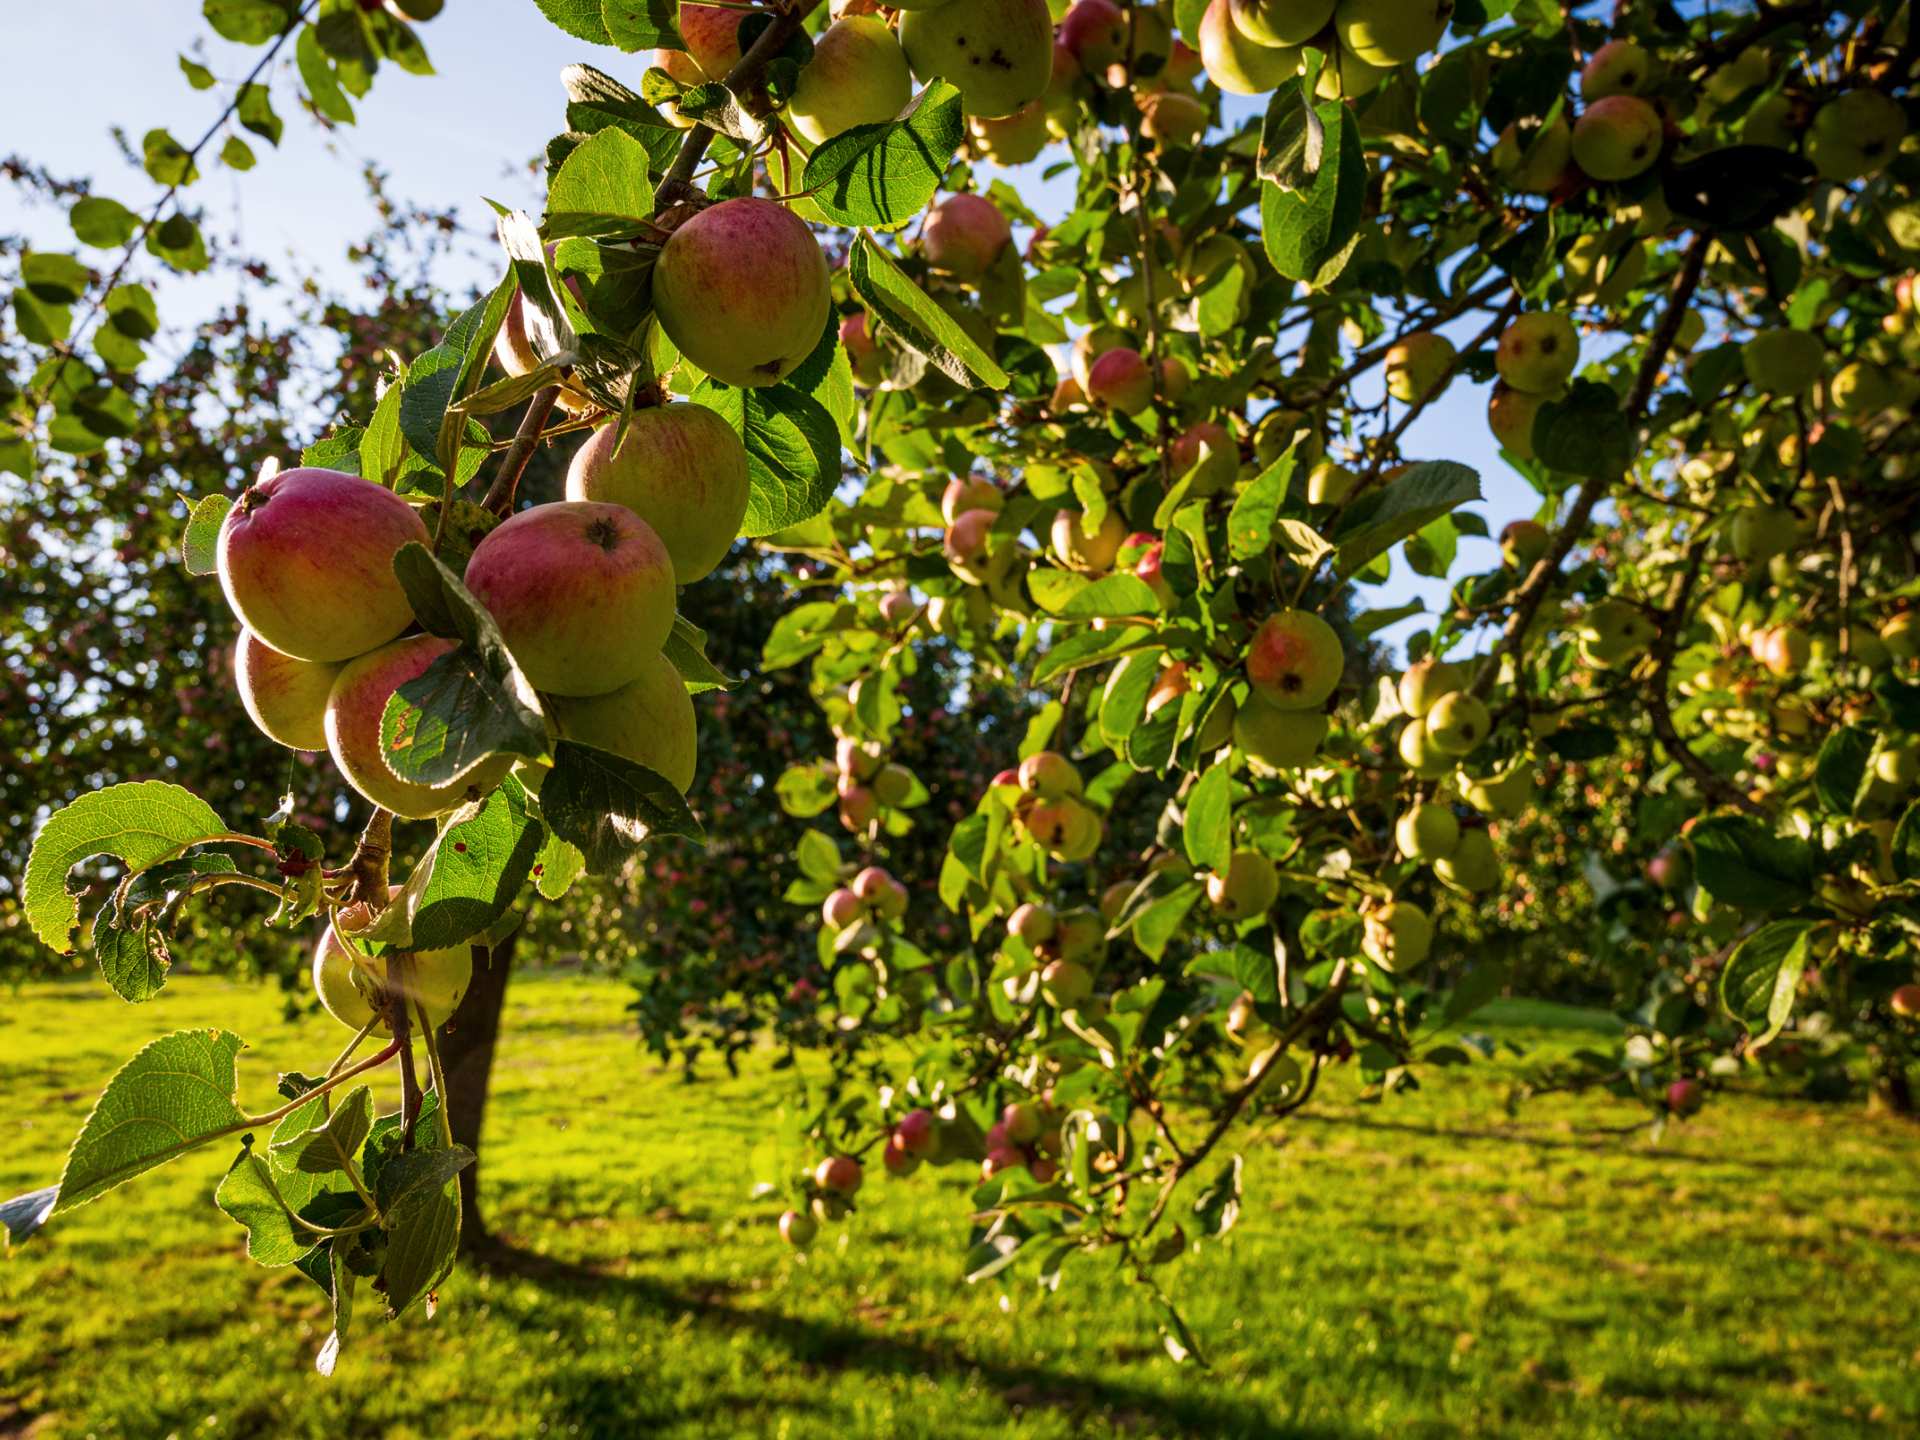 Glenfiddich The Orchard Experiment | The Somerset Cider Brandy Company's apple orchard